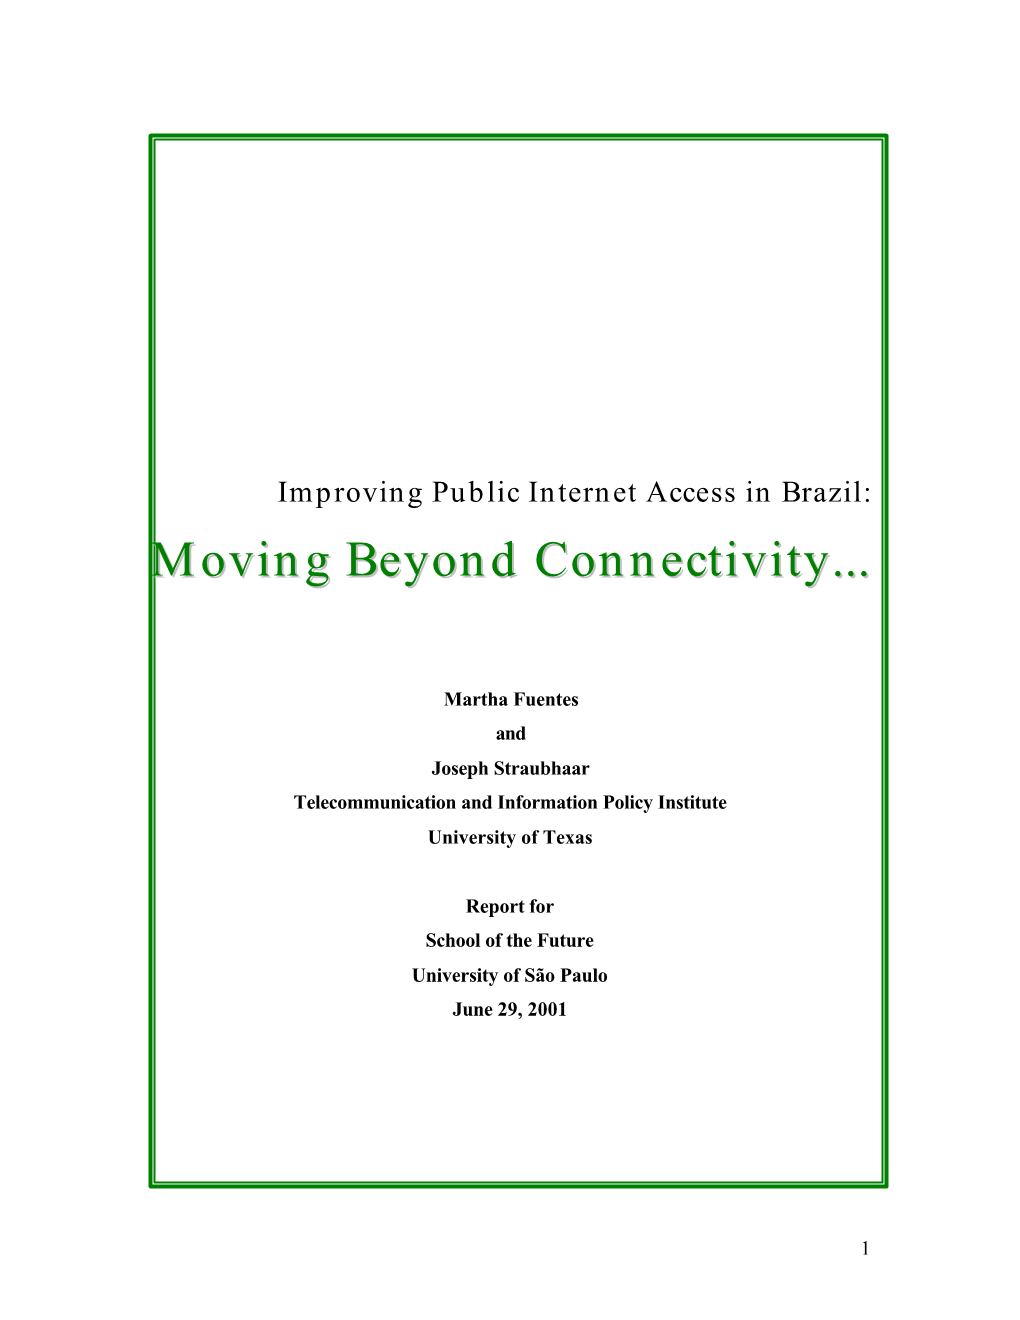 Moving Beyond Connectivity